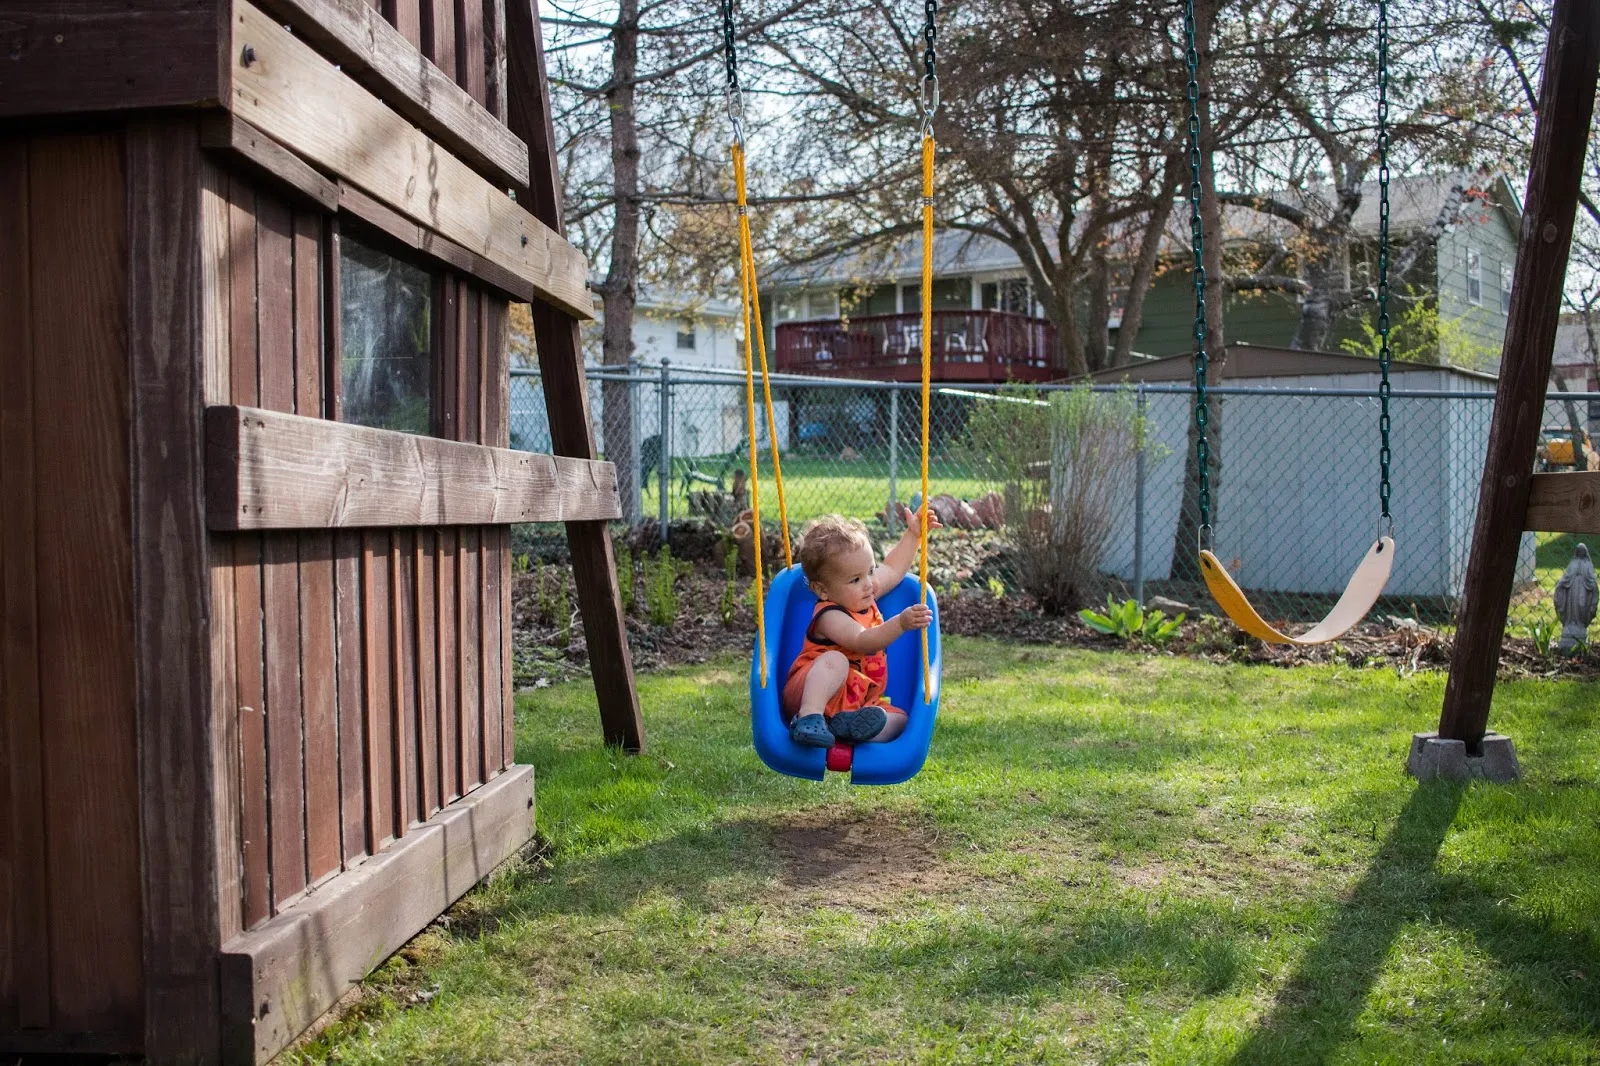 A low accessible swing for toddlers in our Montessori outdoor space.